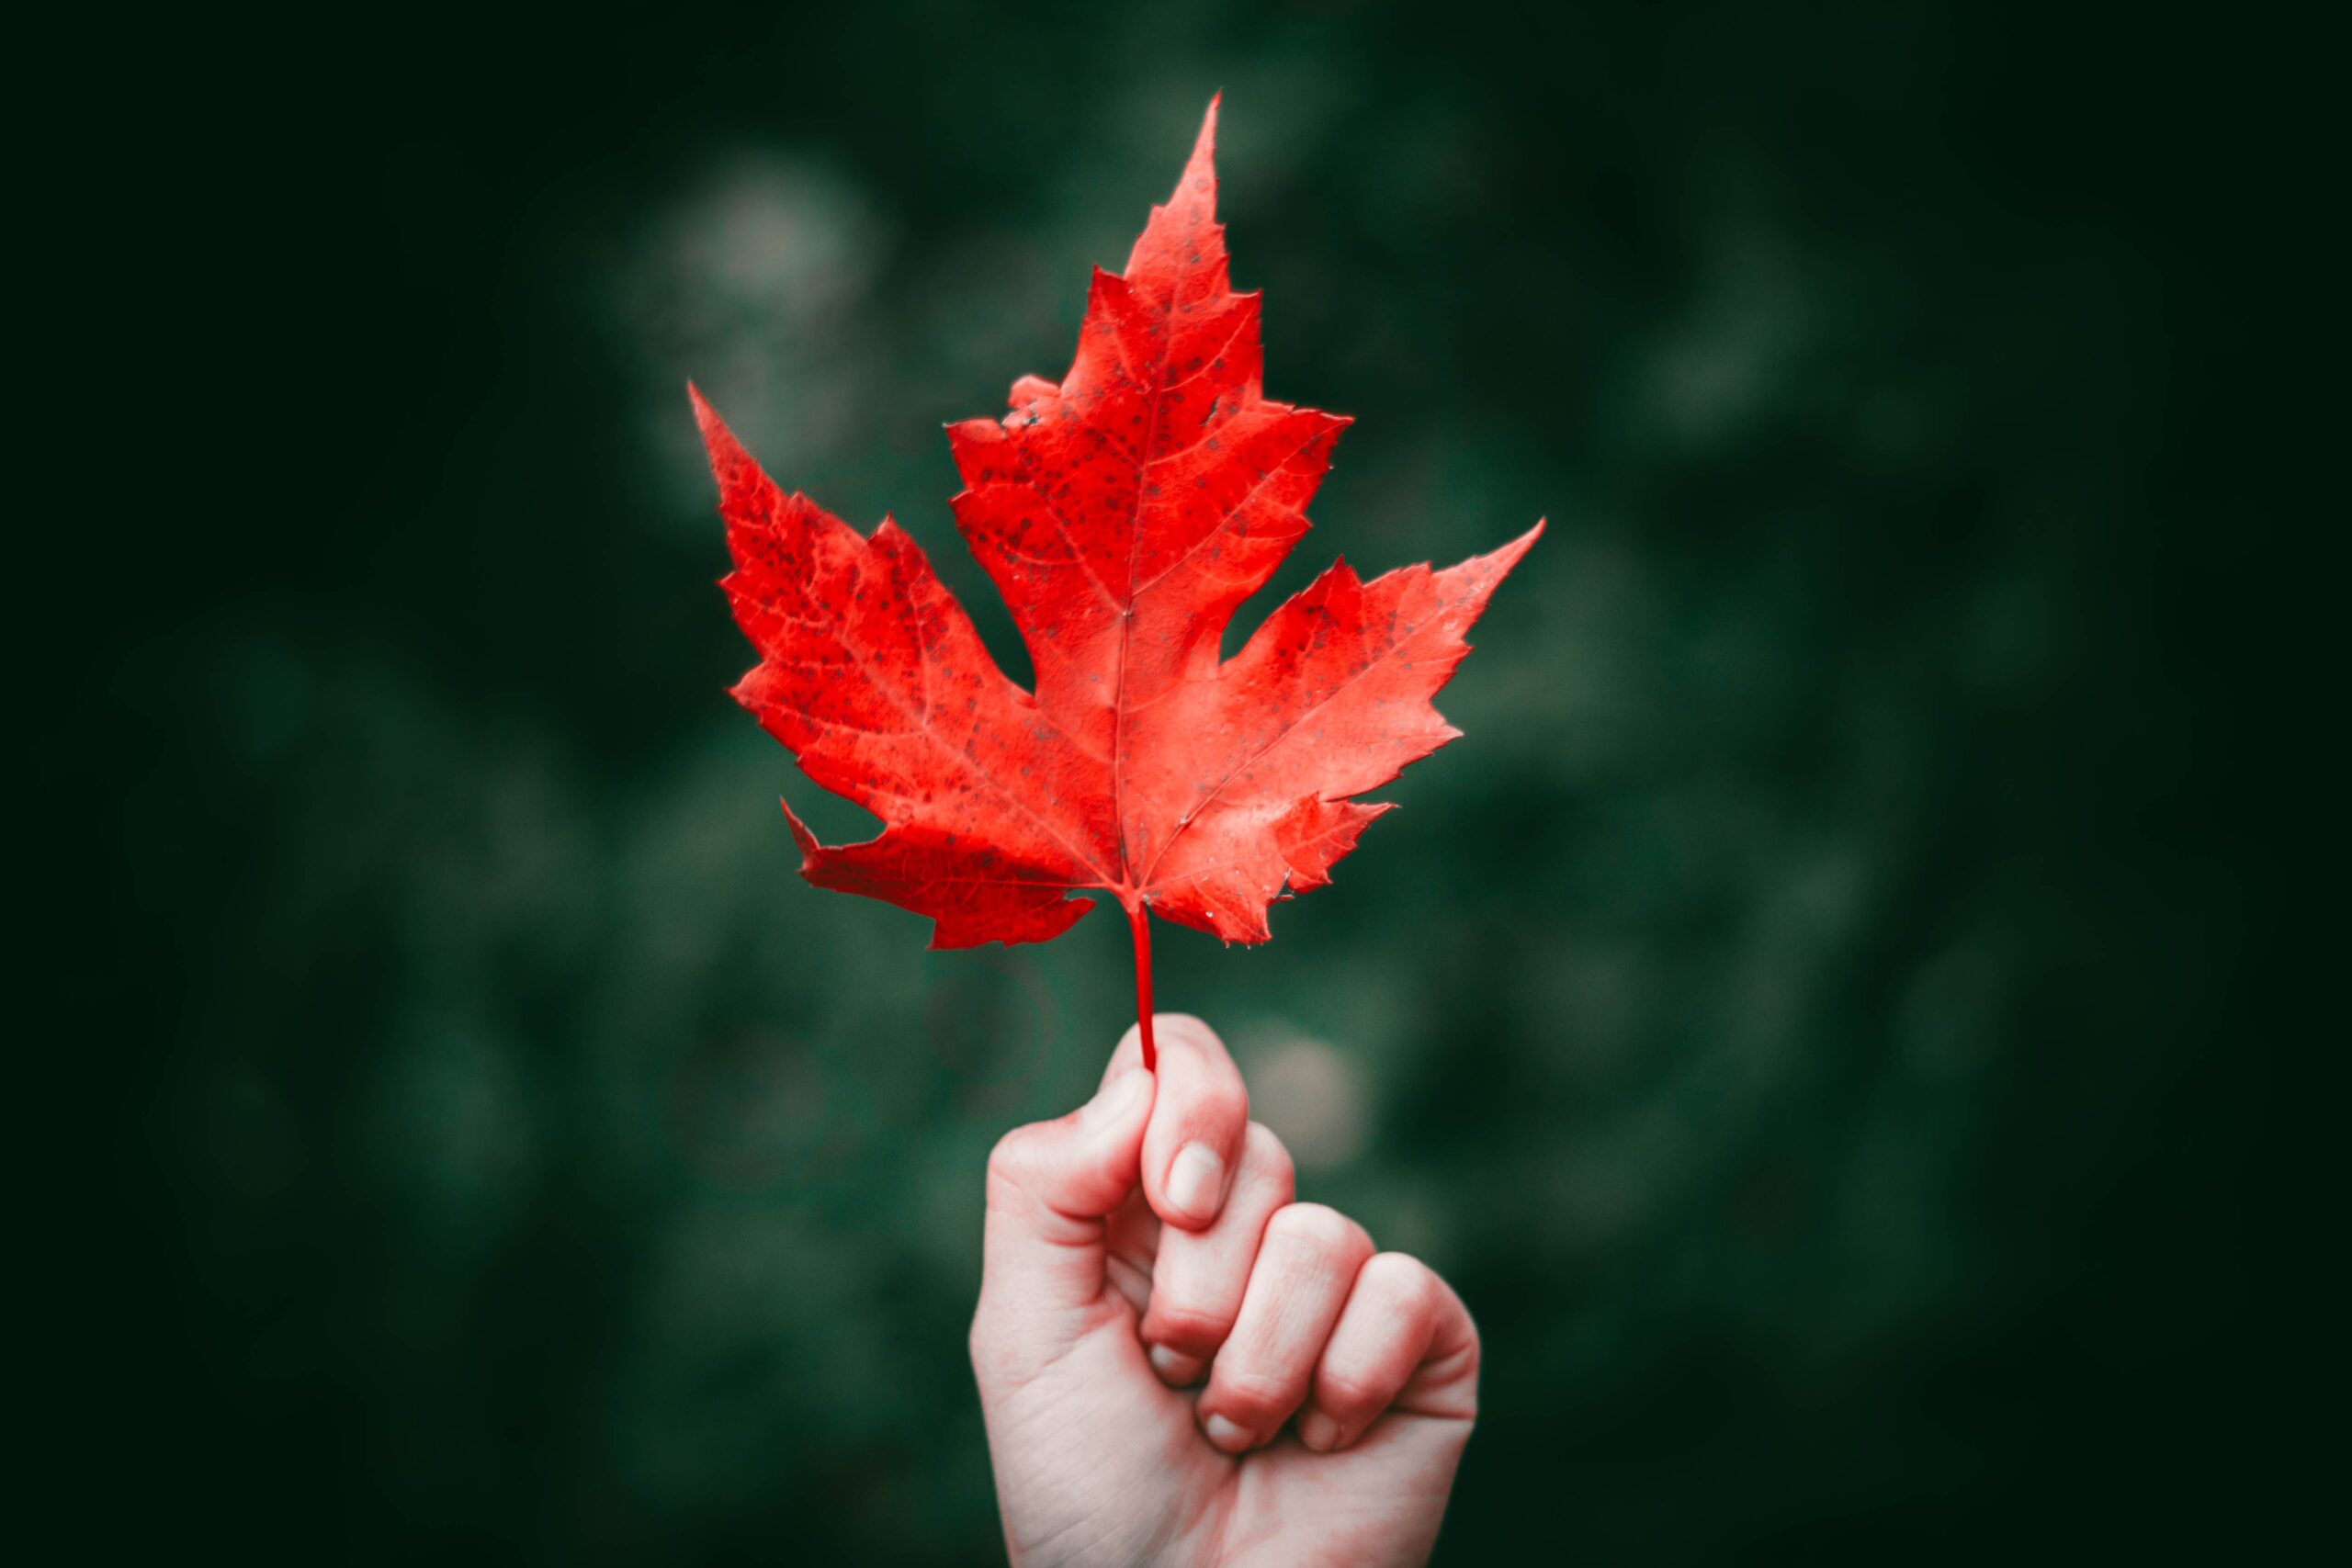 A photo of a hand holding a bright red maple leaf.